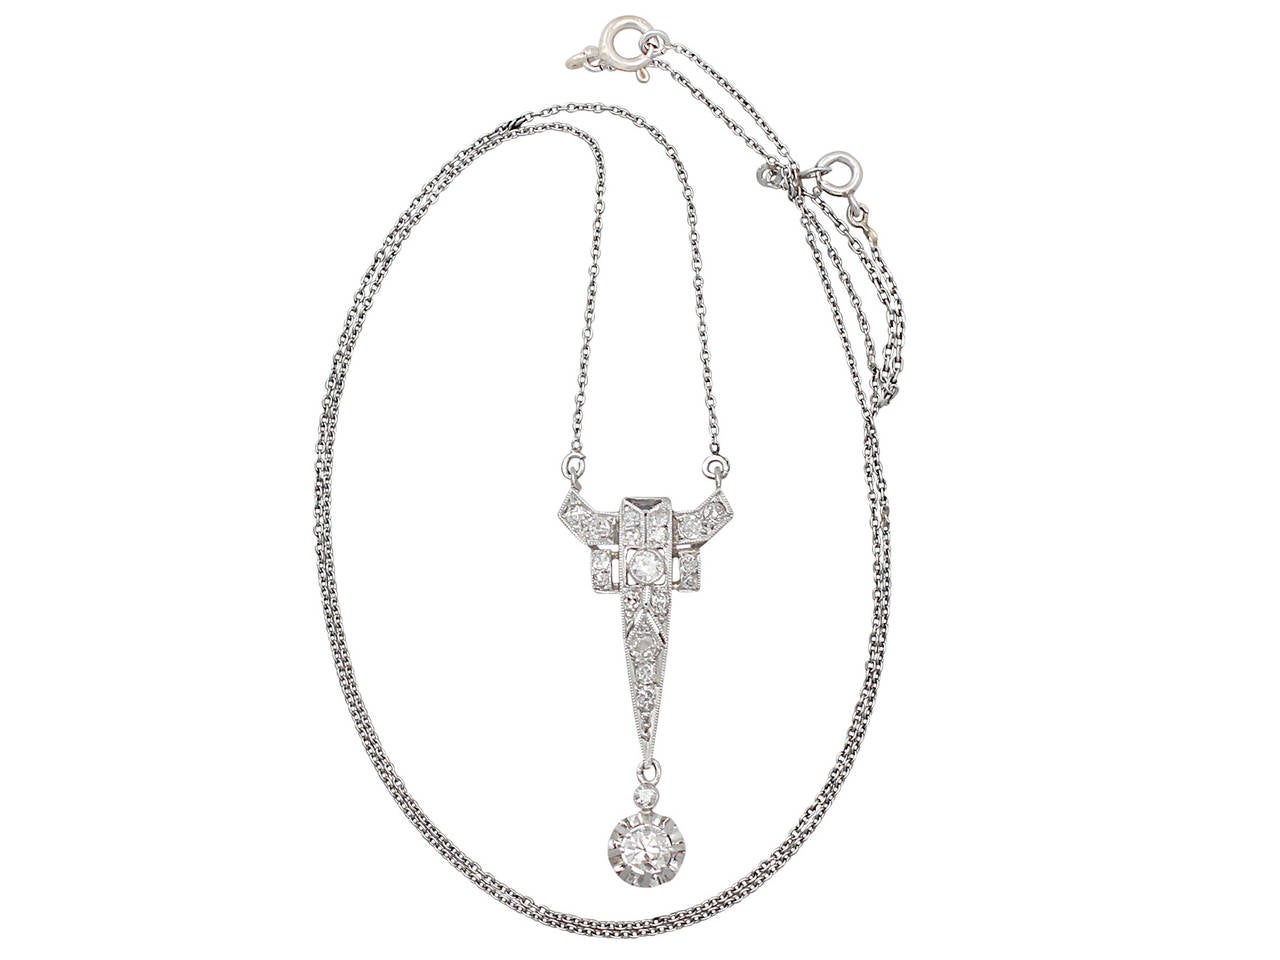 A fine vintage 0.44 carat diamond and platinum, Art Deco style pendant; part of our vintage jewelry and estate jewelry collections

This fine vintage diamond pendant has been crafted in platinum.

The pierced decorated frame has an iconic angular